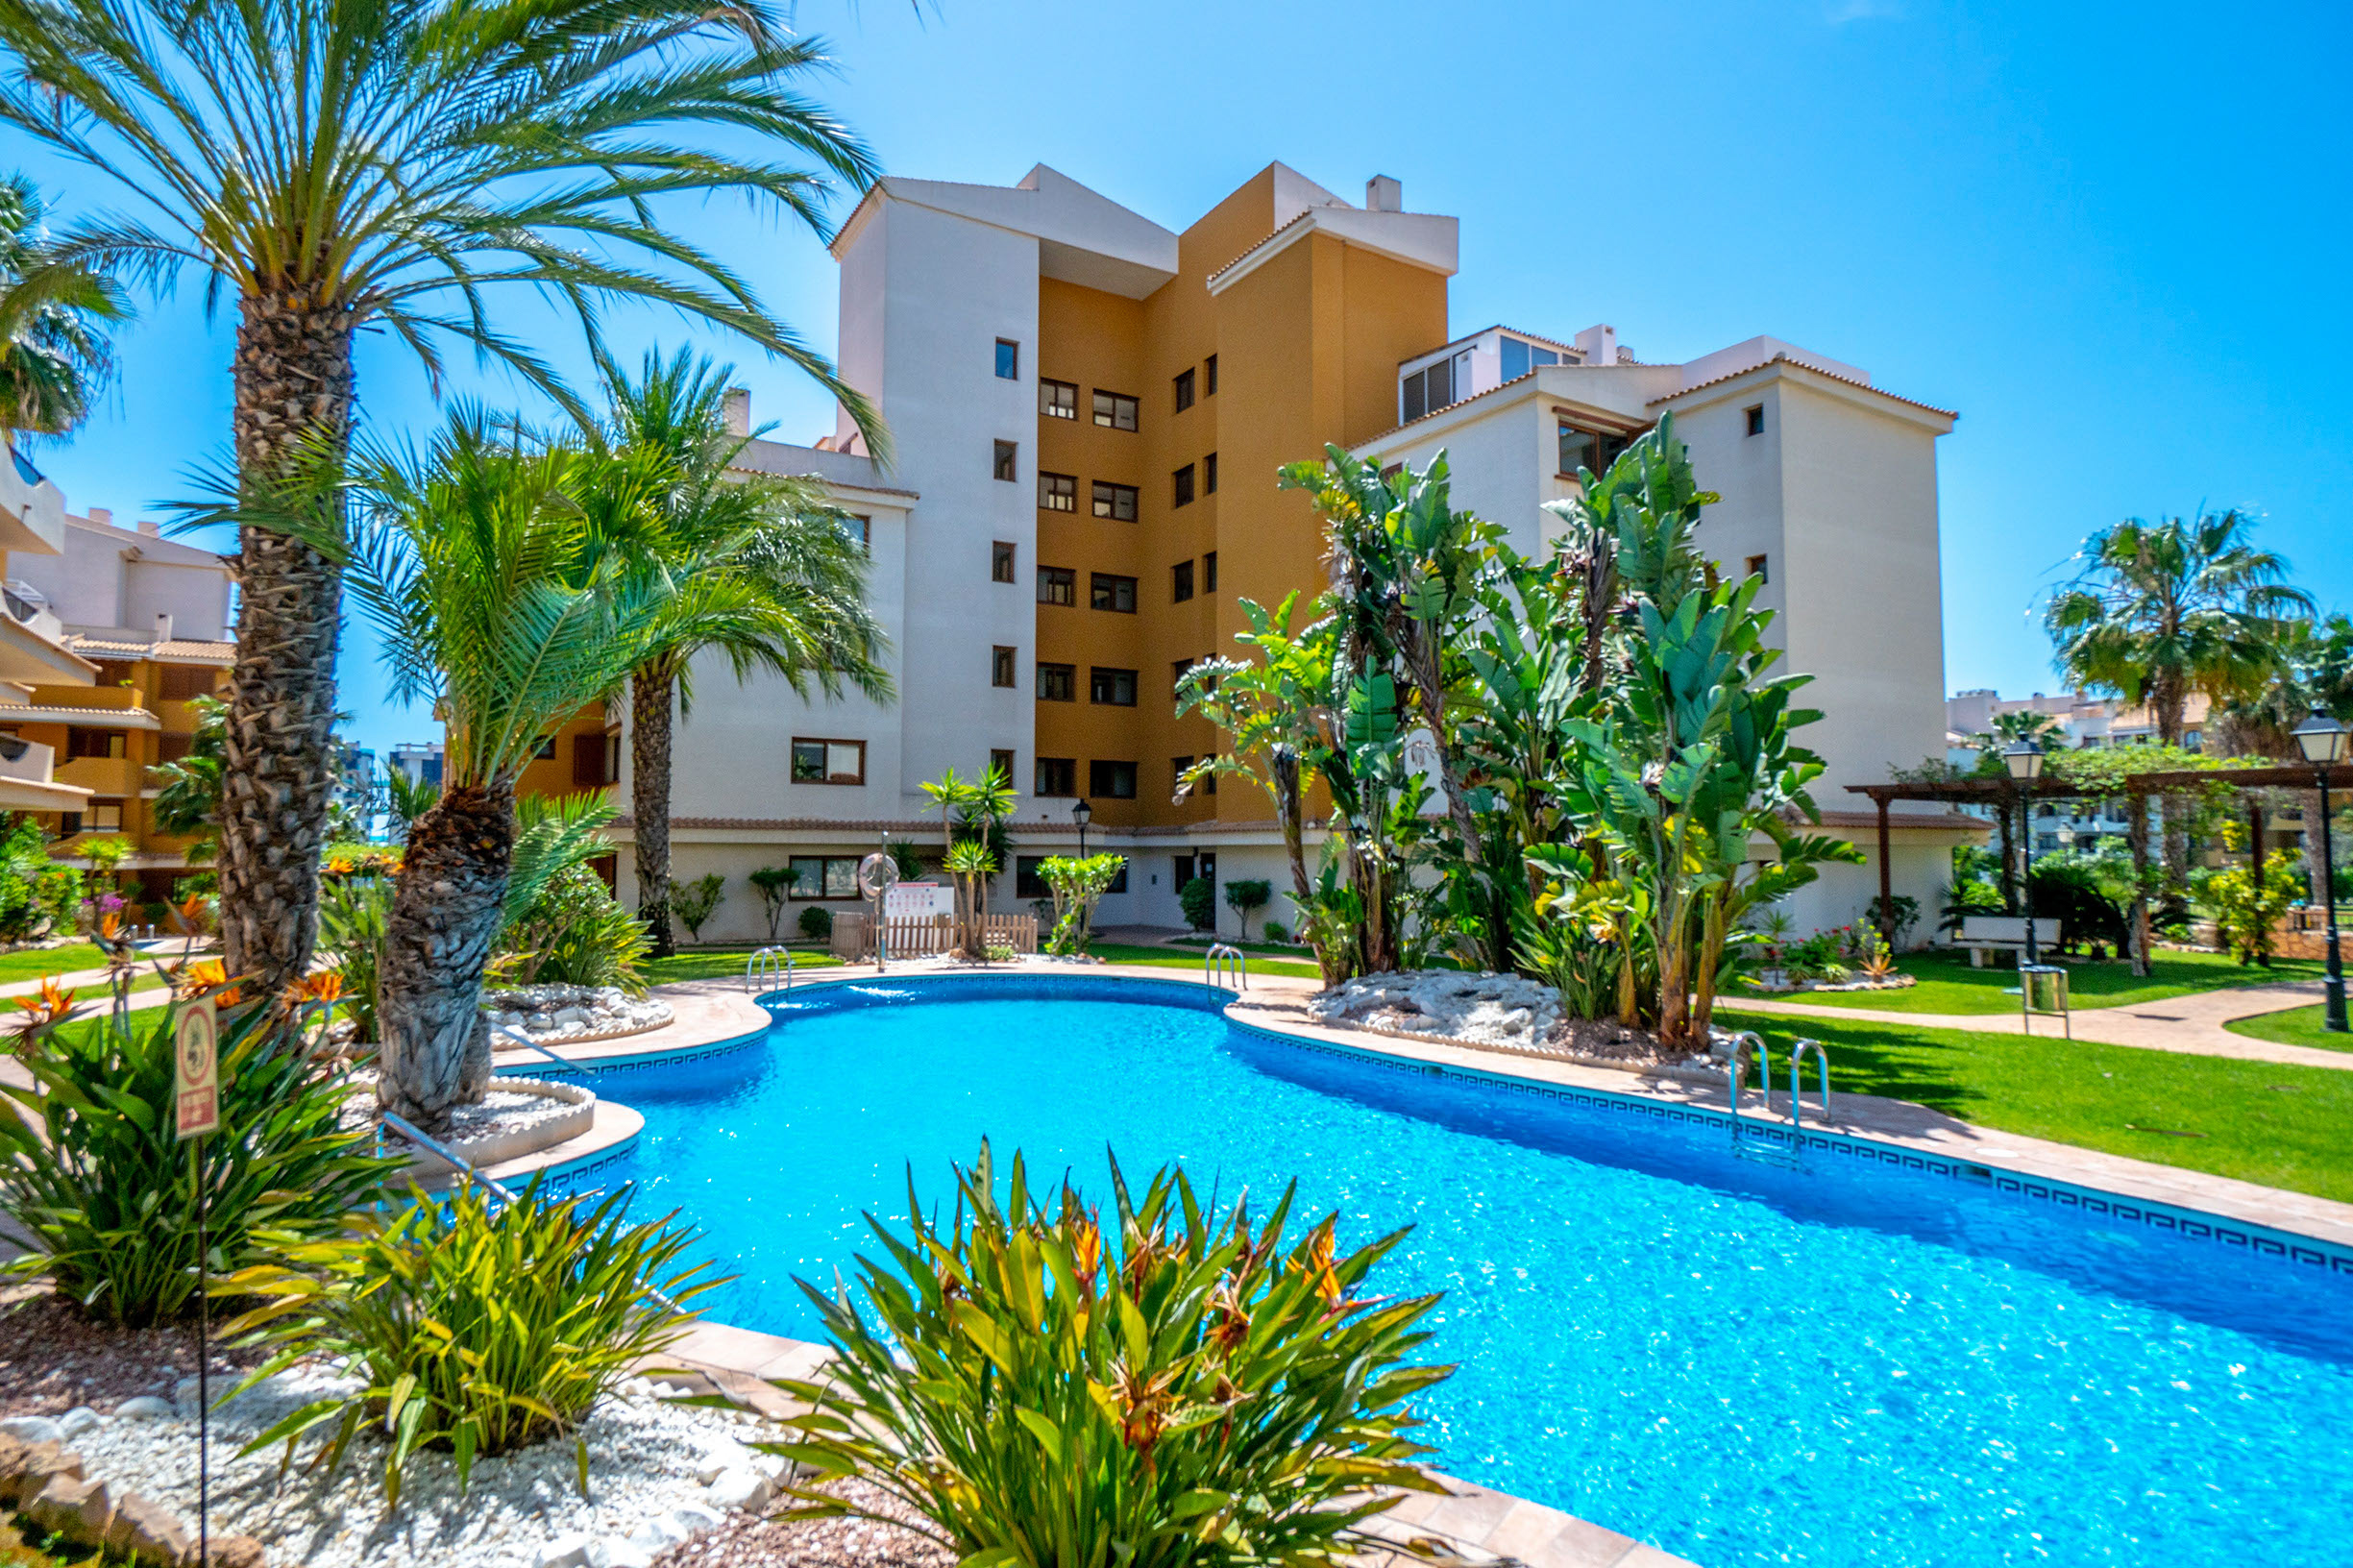 Property Image 605789-torrevieja-apartment-2-2